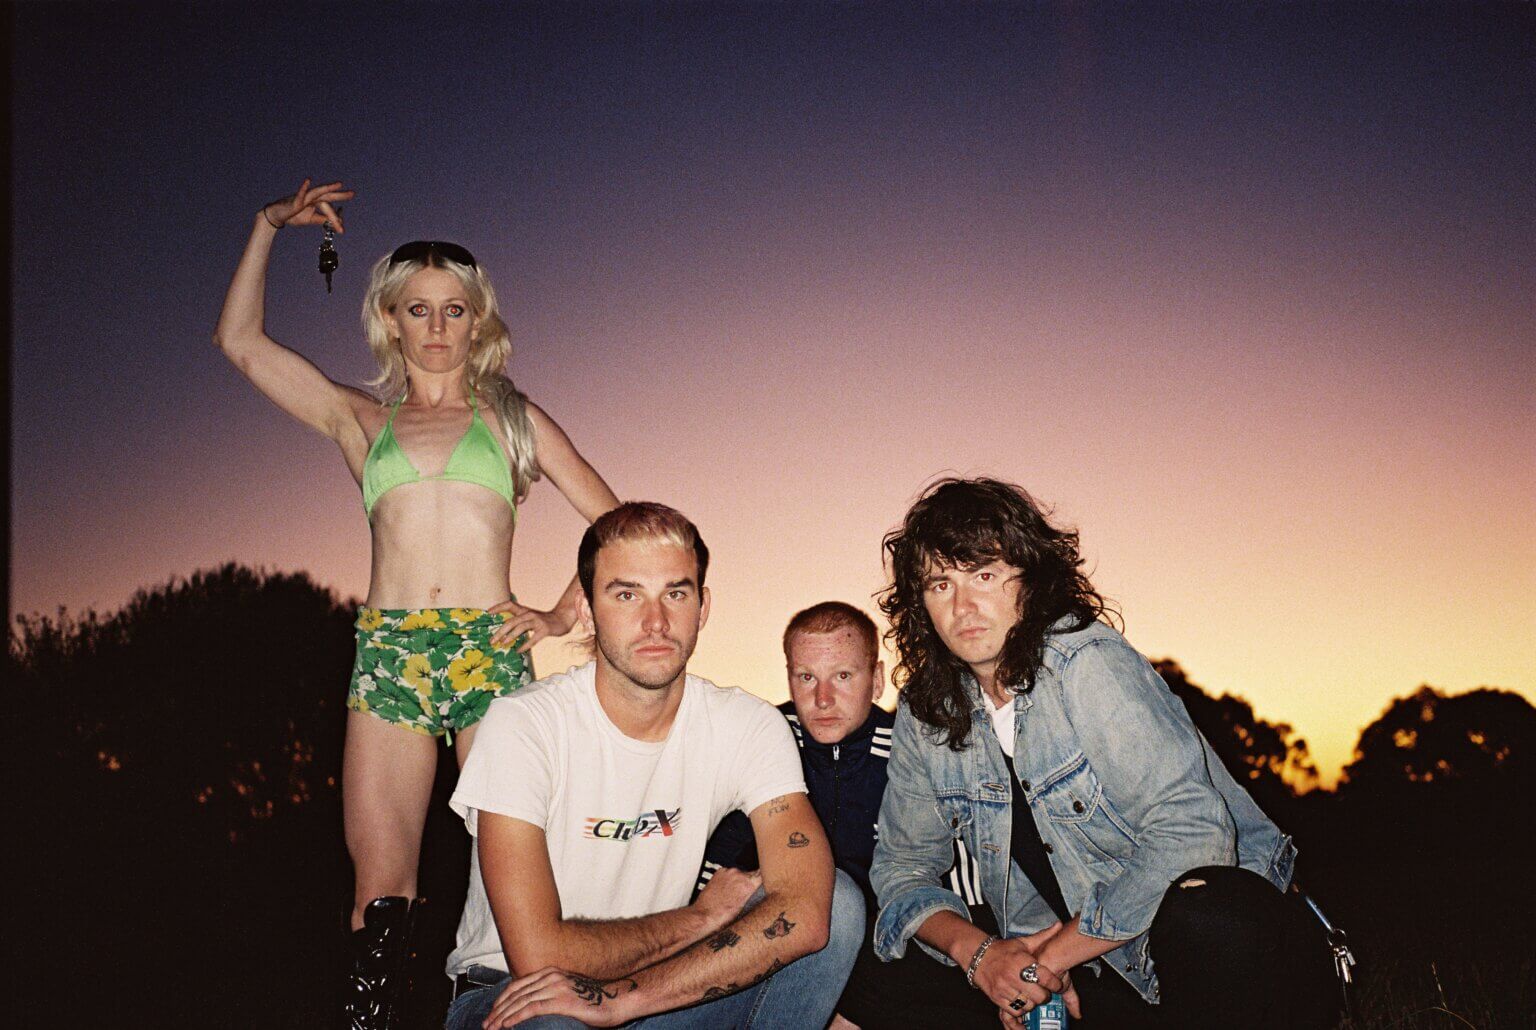 Australian band Amyl & the Sniffers, made their North American television debut last night on Late Night with Seth Meyers